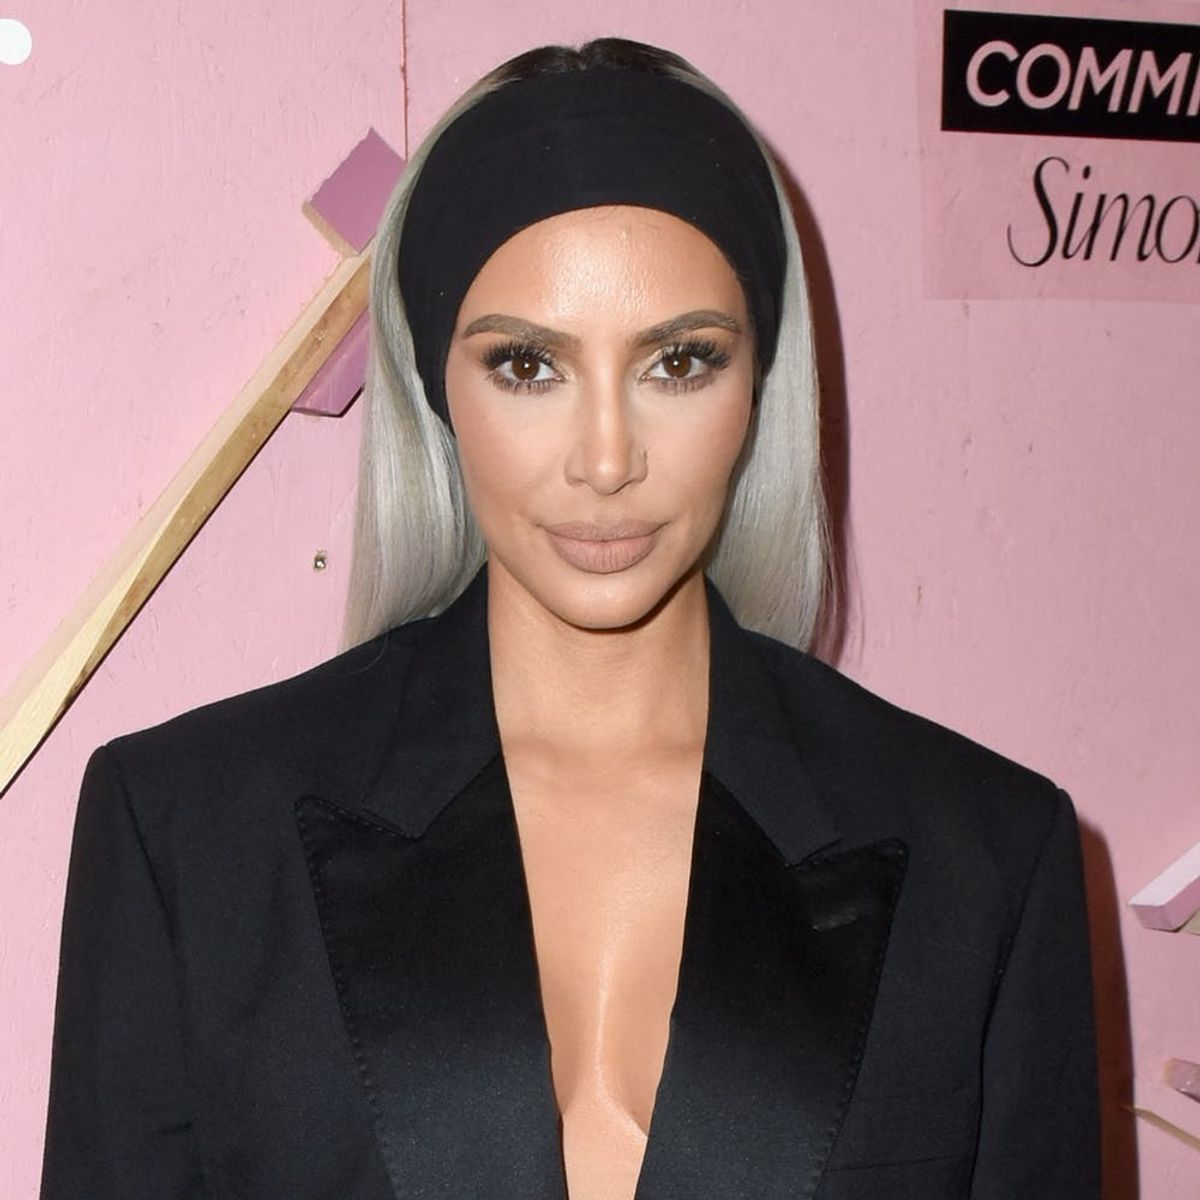 Kim Kardashian West Has Returned to the Dark Side With a New Brunette ‘Do